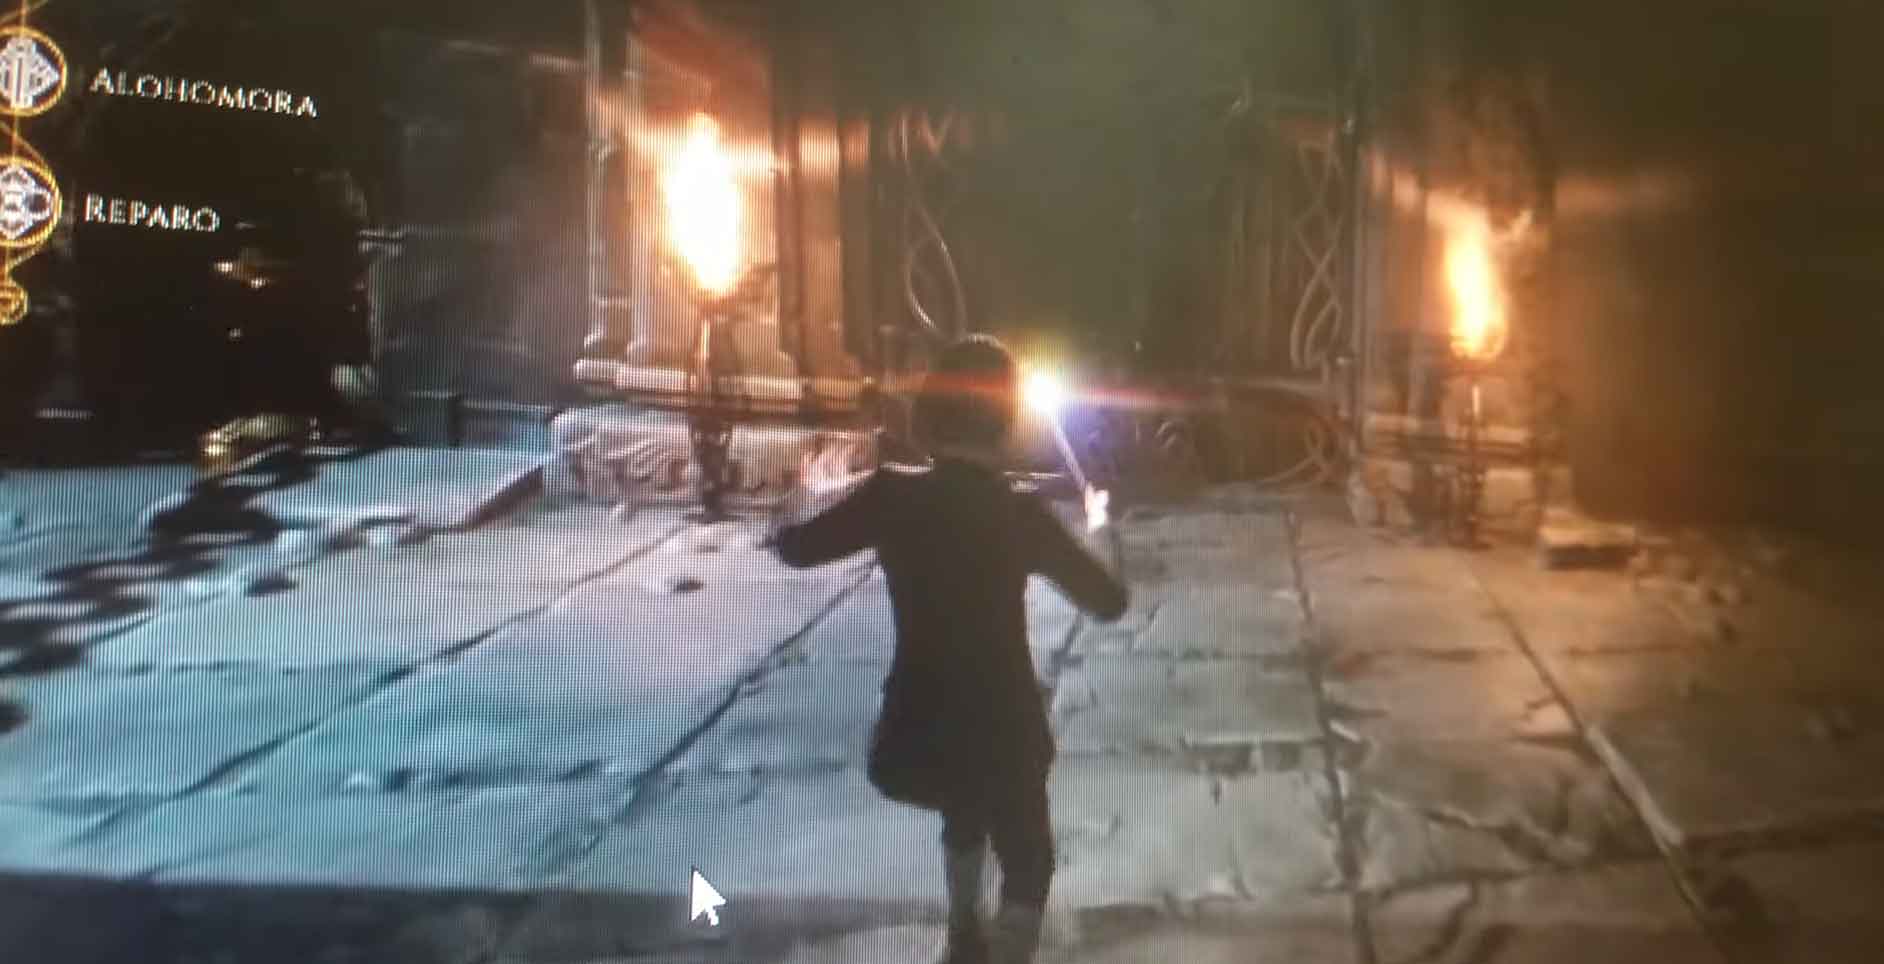 [Rumor] Harry Potter RPG video footage appears on the Internet